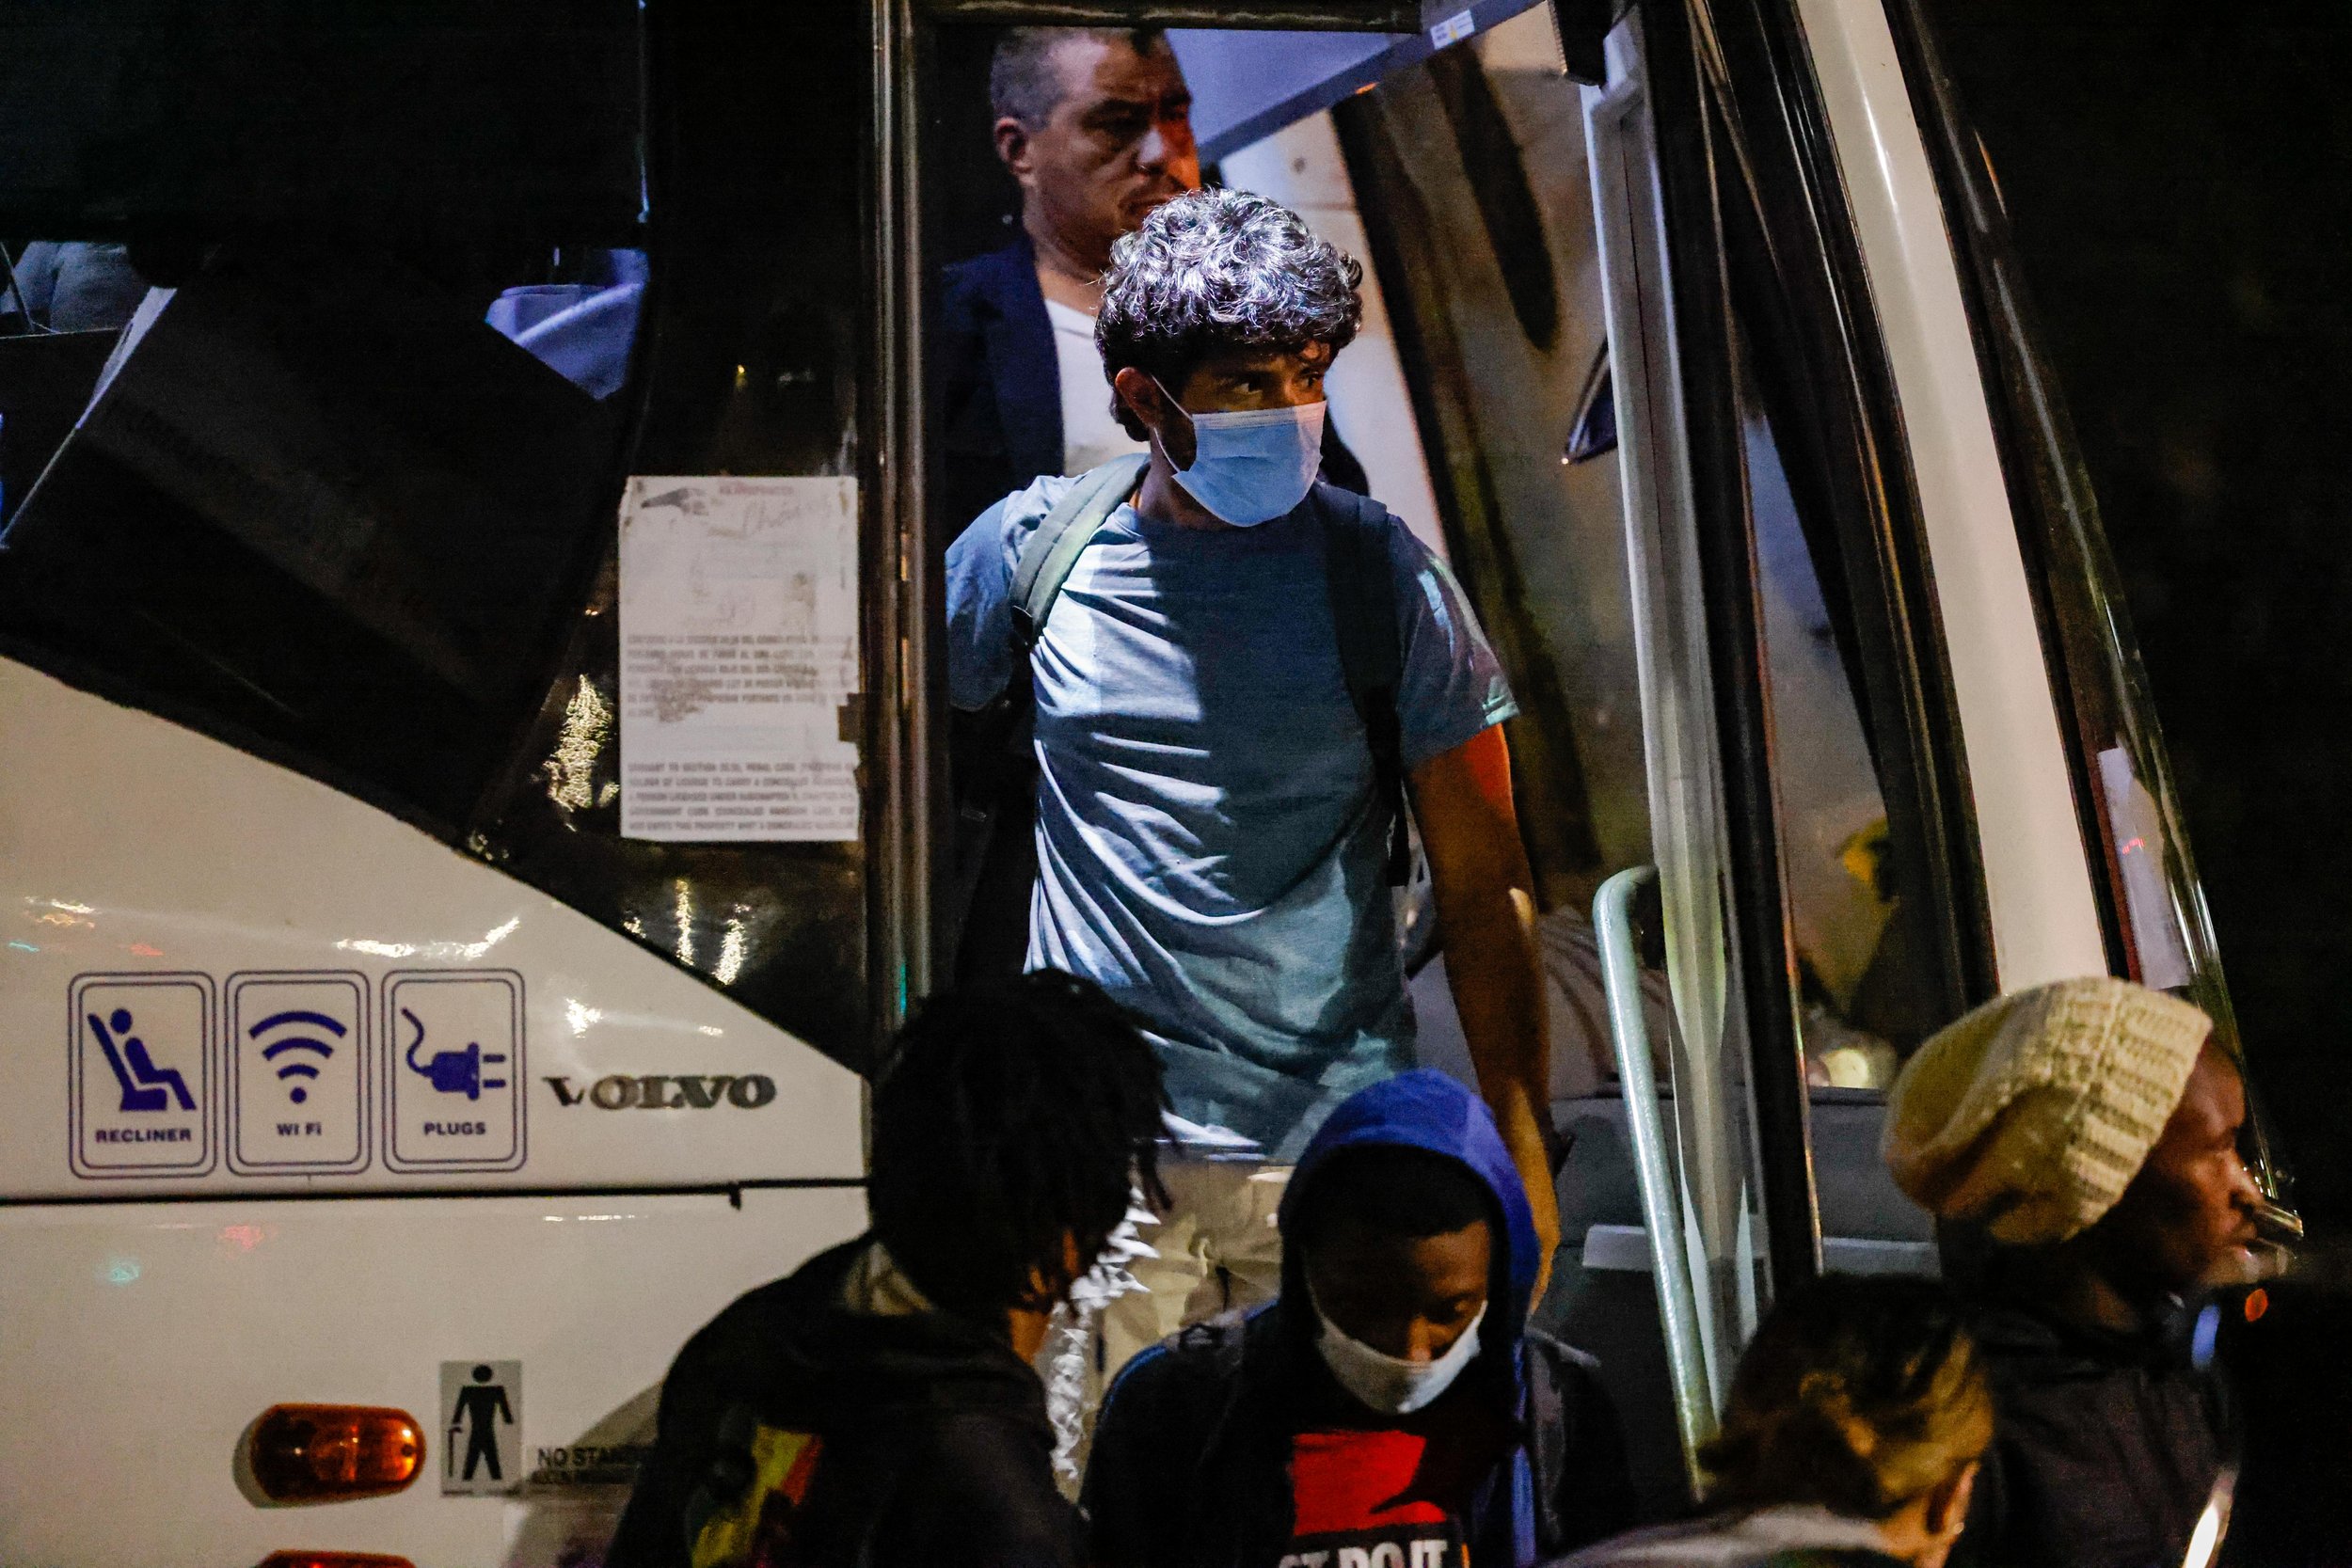  Victor Rodriguez, 26, disembarks the bus that took him along with a group of migrants from Texas to Washington, D.C. on Thursday, April 21, 2022. Rodriguez, originally from Venezuela, requested to be part of those who are using the service offered b